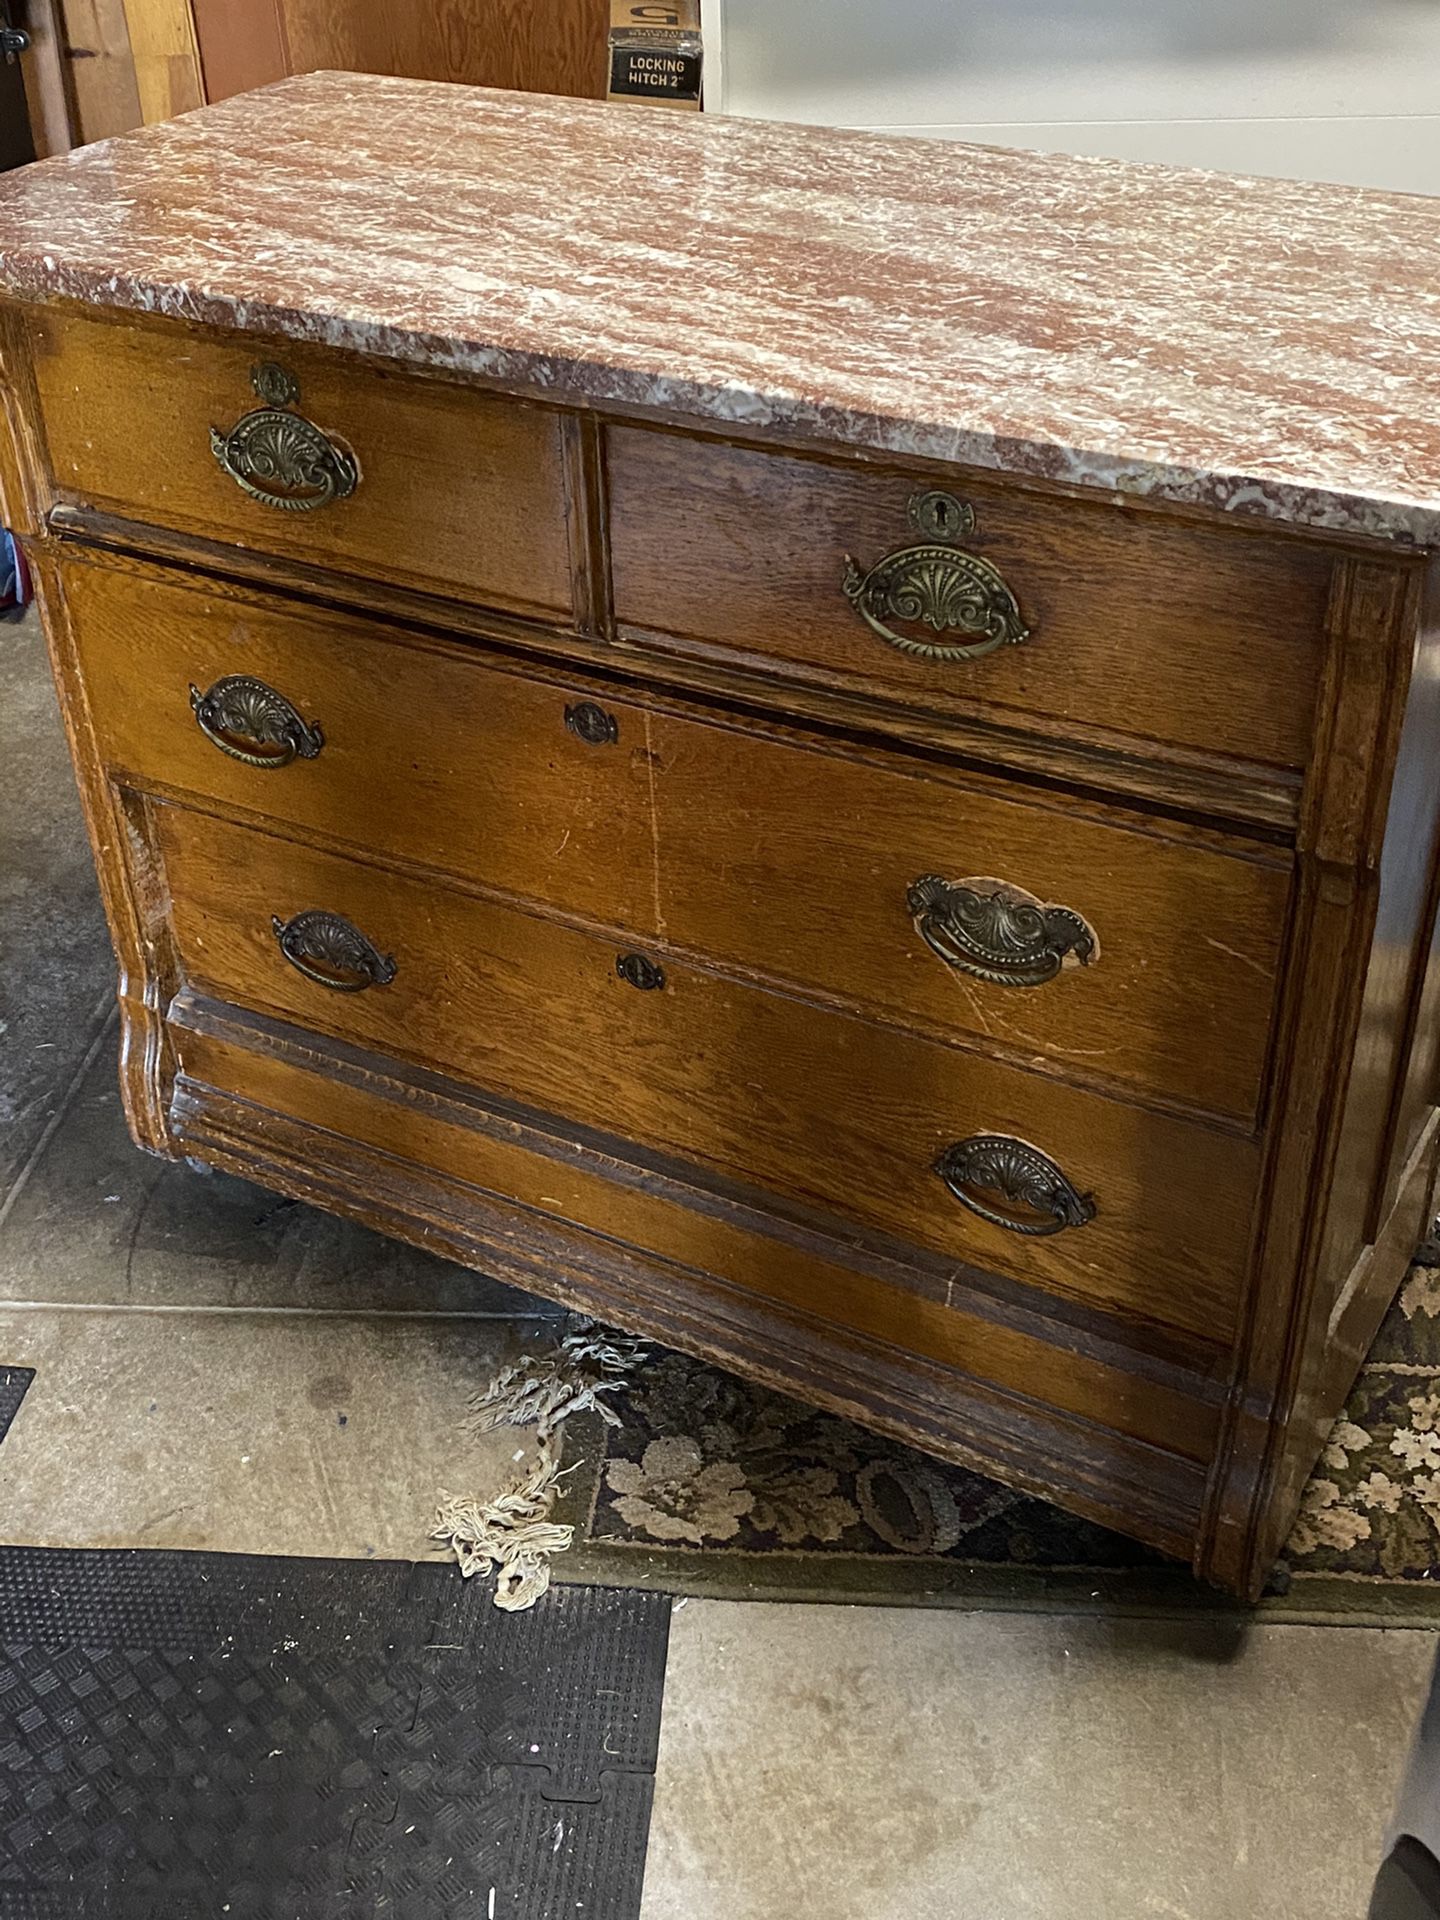 Lovely antique dresser with marble top